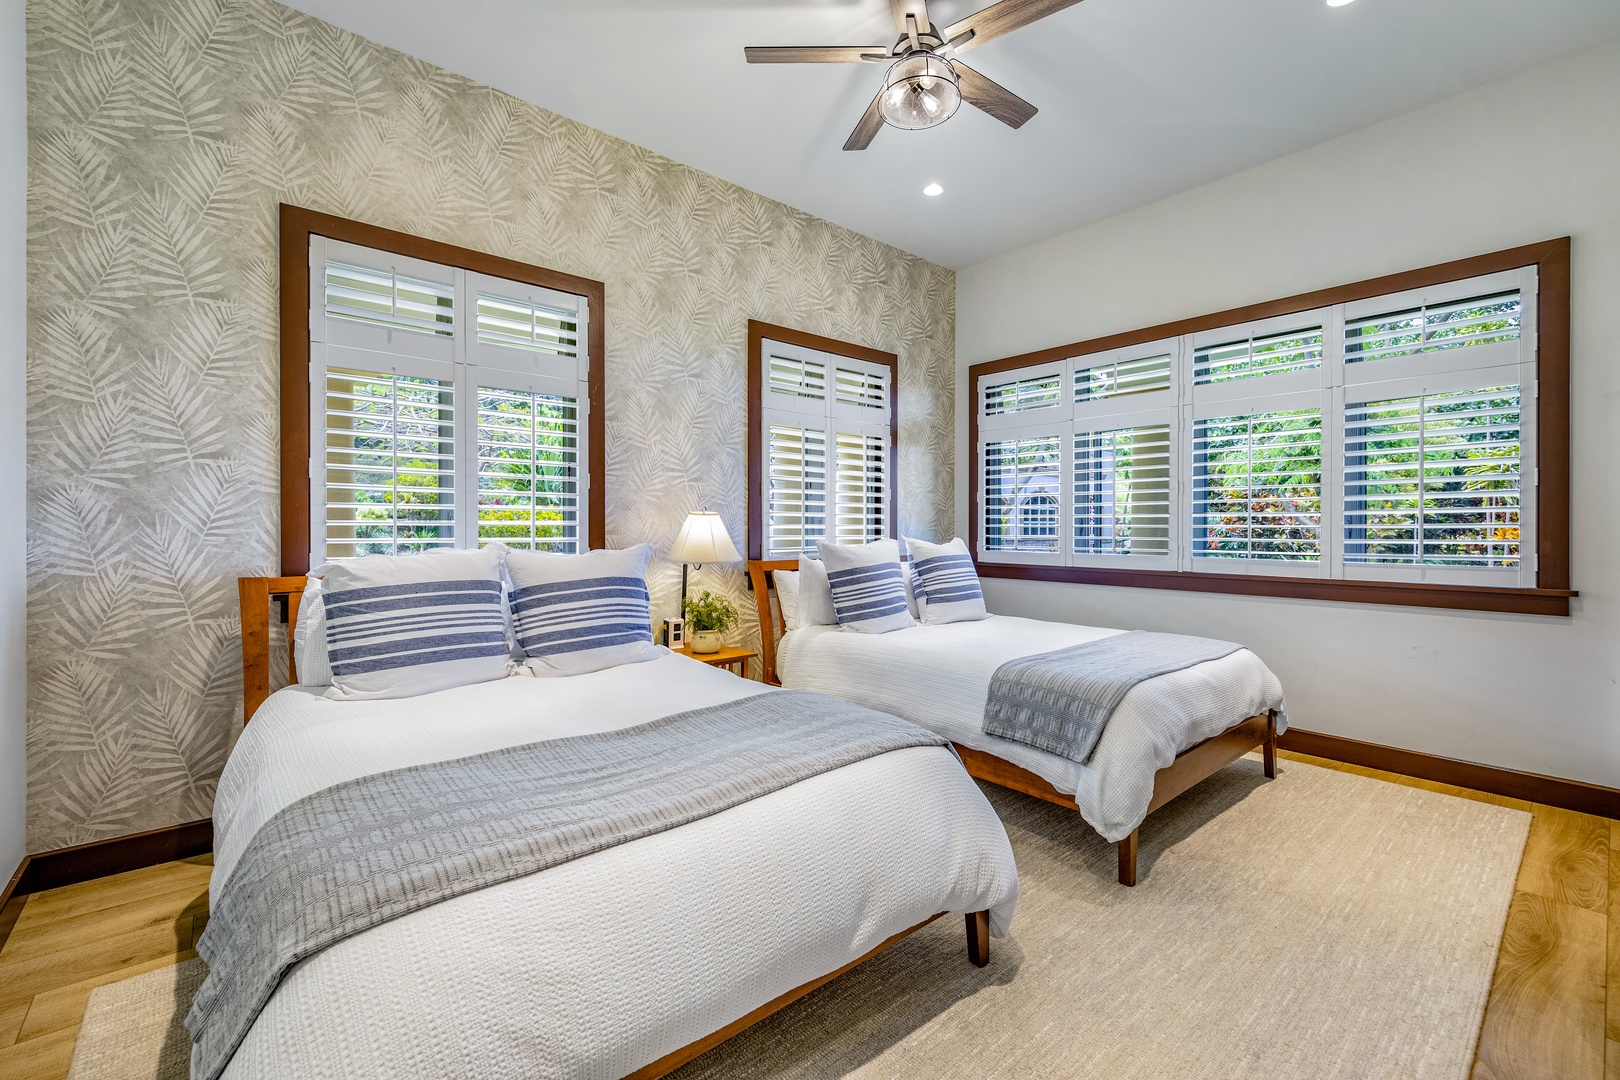 Kailua Kona Vacation Rentals, Kailua Kona Estate** - The fourth bedroom with two full-size beds and natural light.